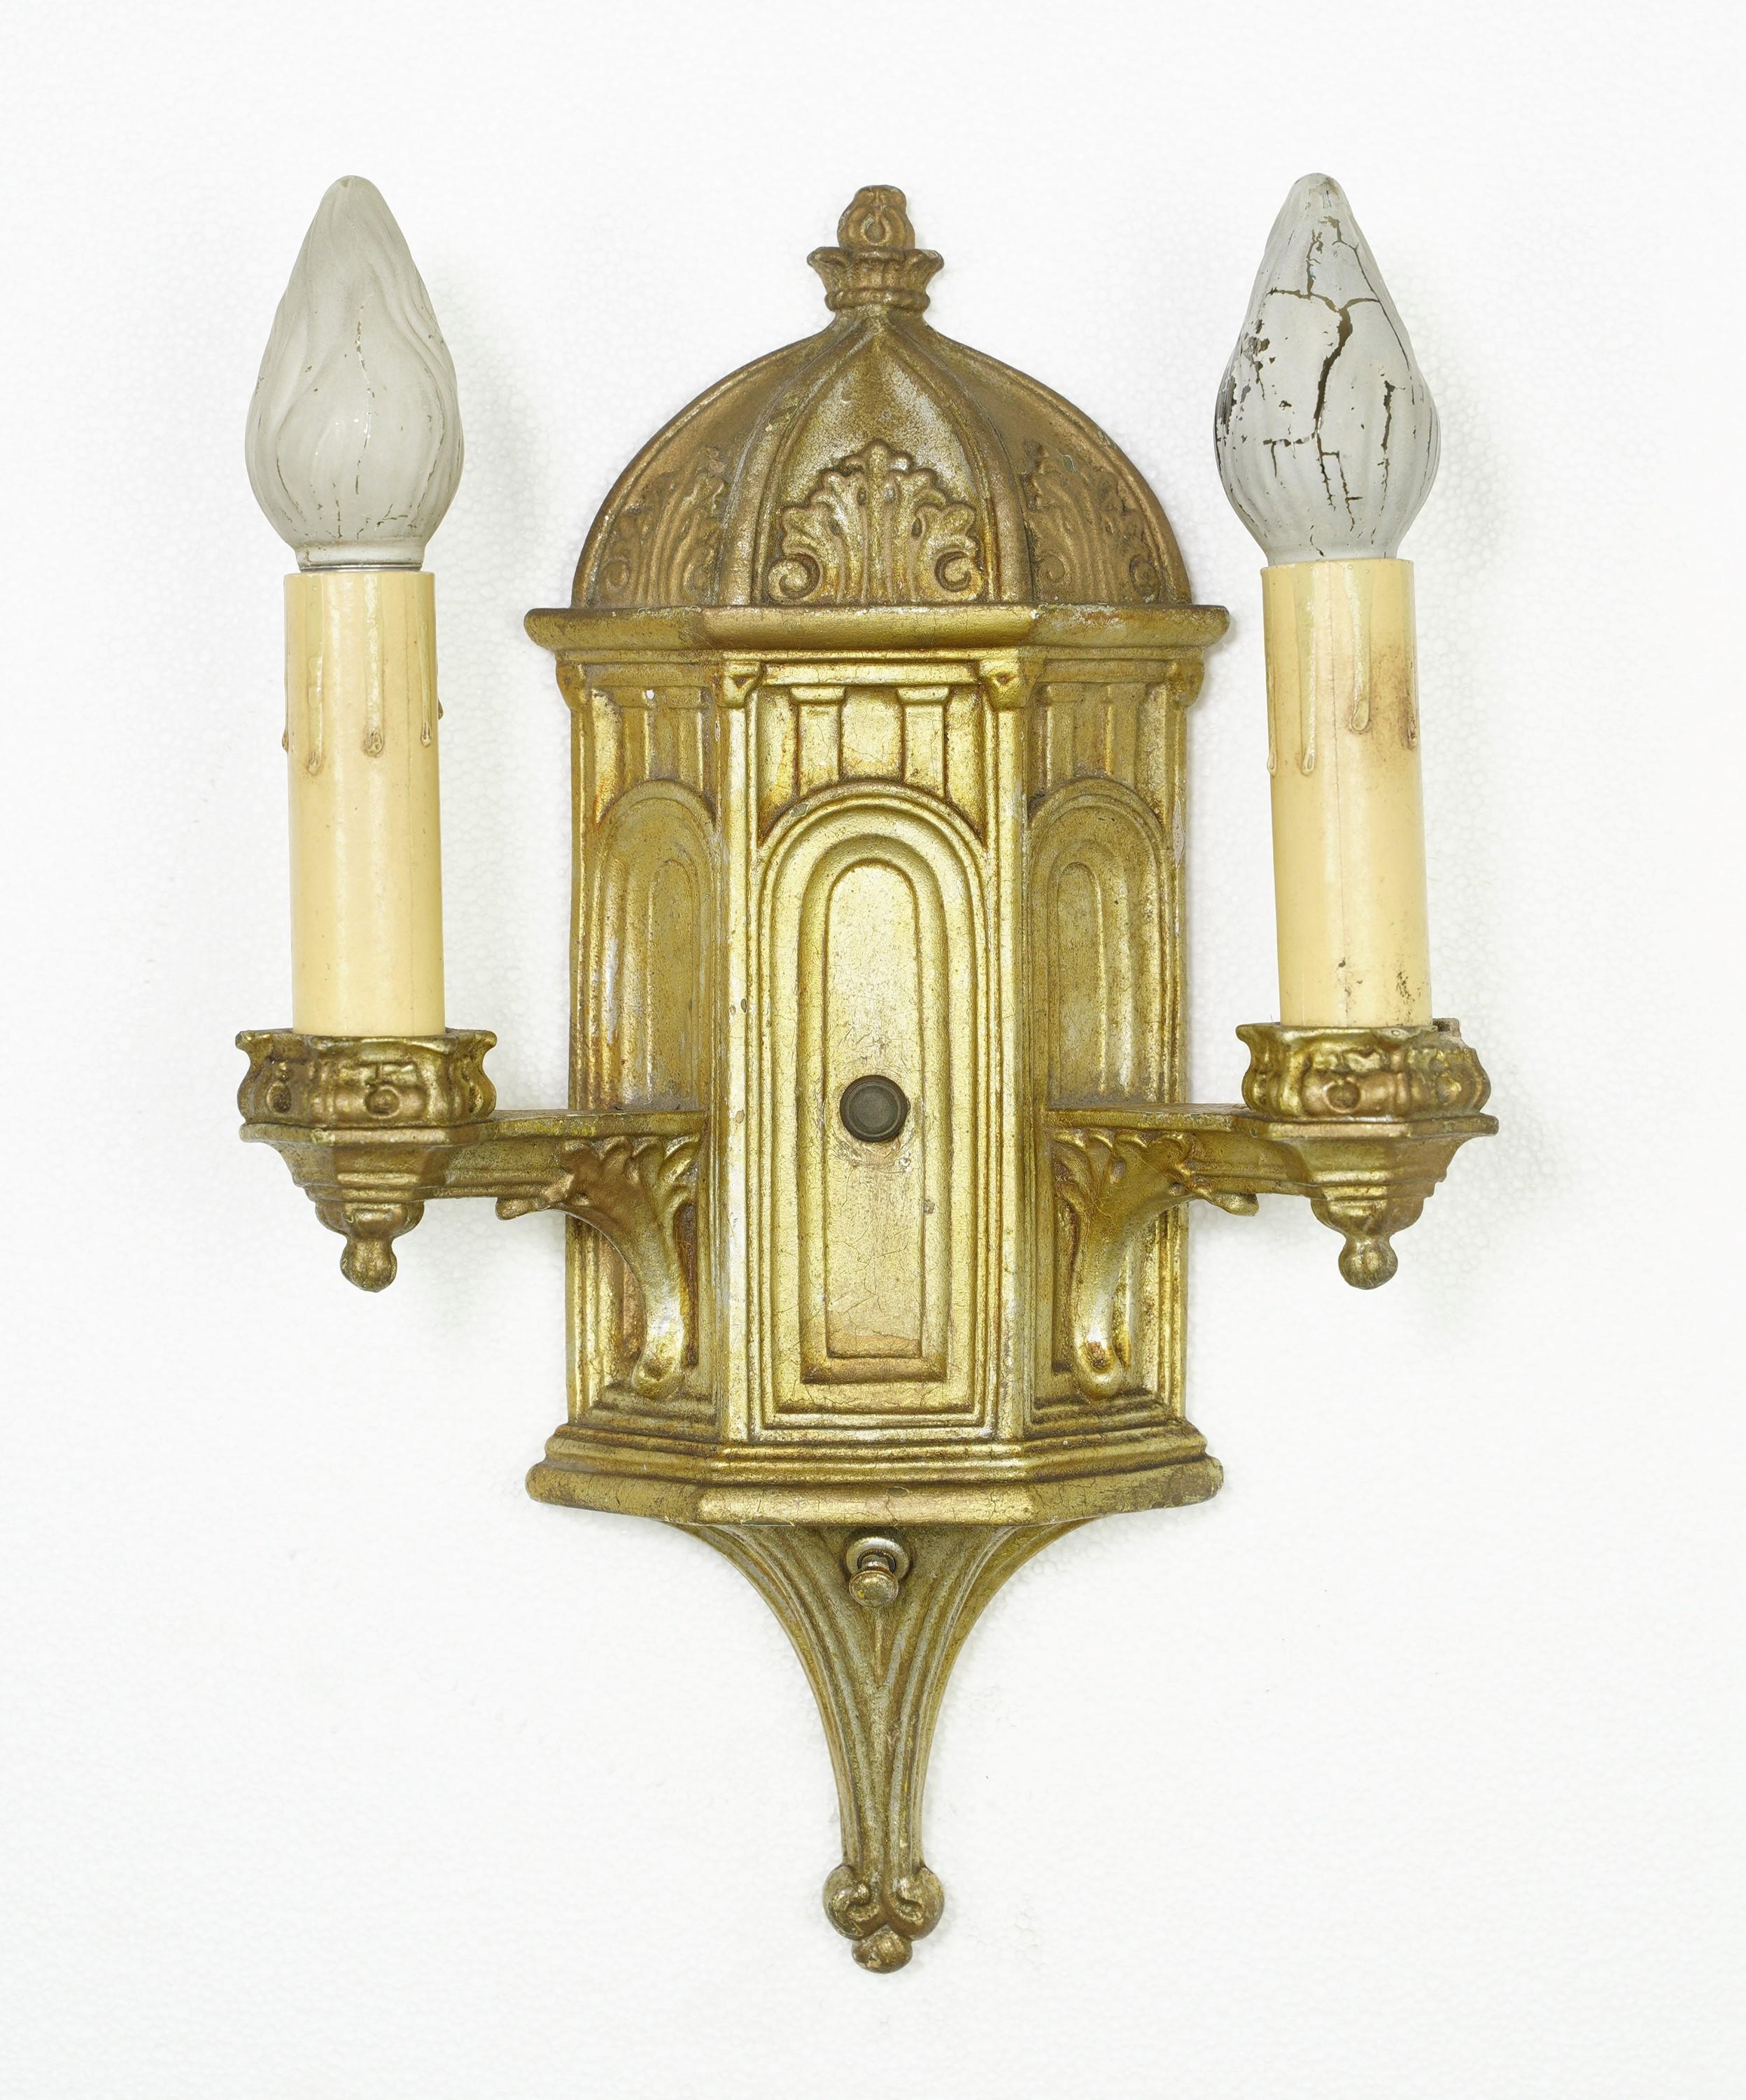 Early 20th Century pair of two light gold Gothic style sconces made out of plaster. Takes two standard Edison base sockets. Cleaned and restored. The area around the sockets has minor cracks & chips and the plaster has minor chipping. Please see